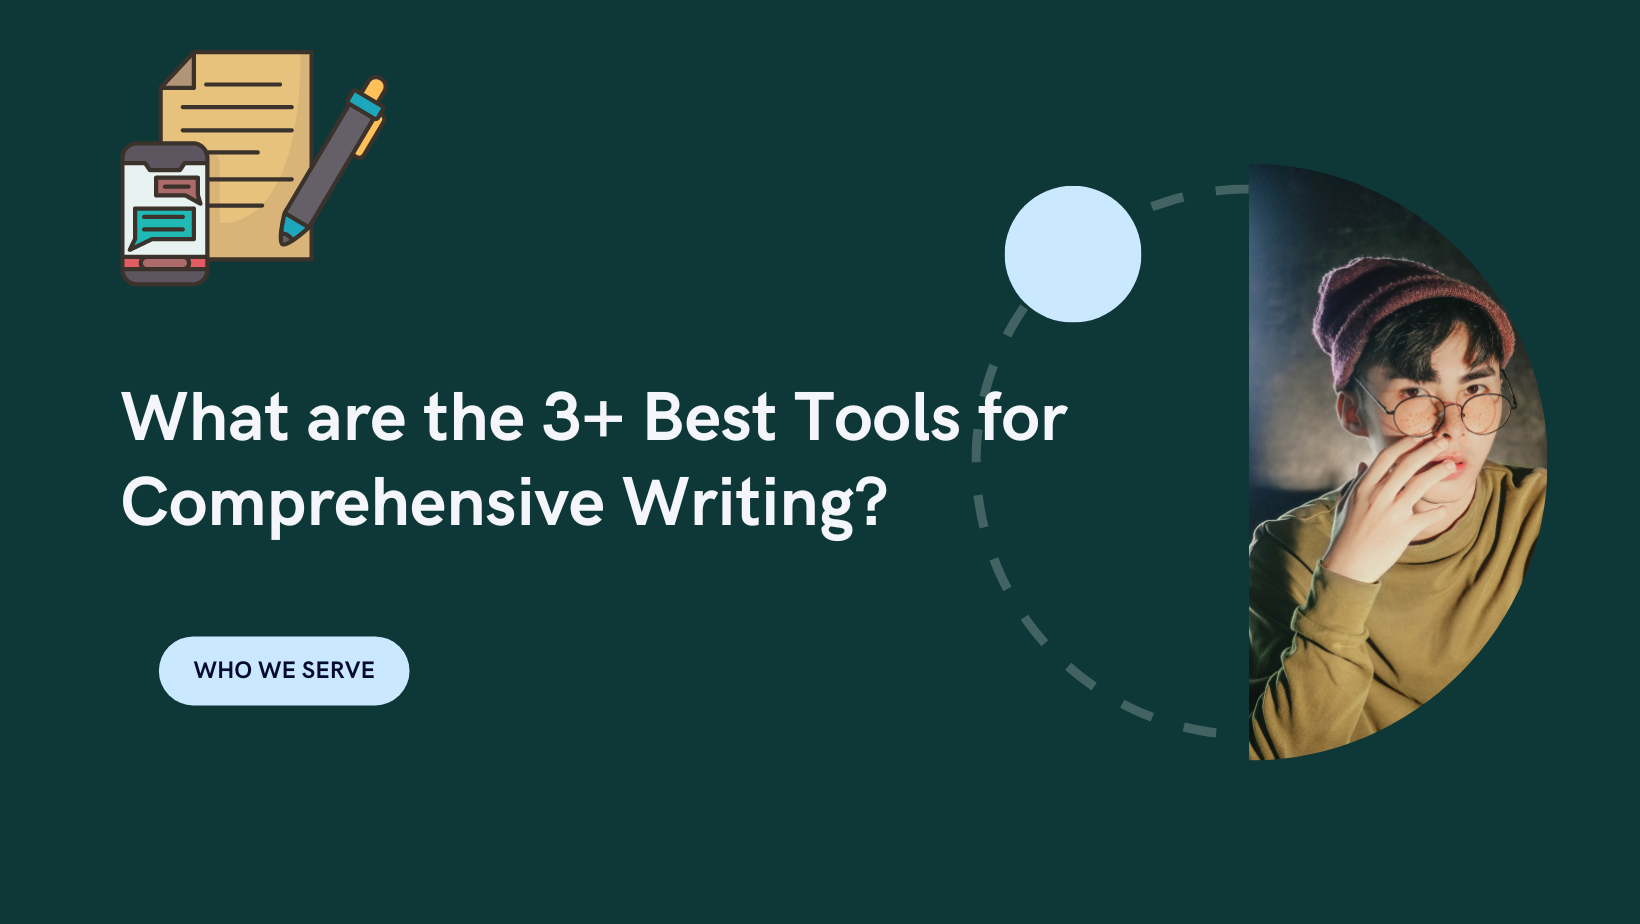 3+ Best Tools for Comprehensive Writing